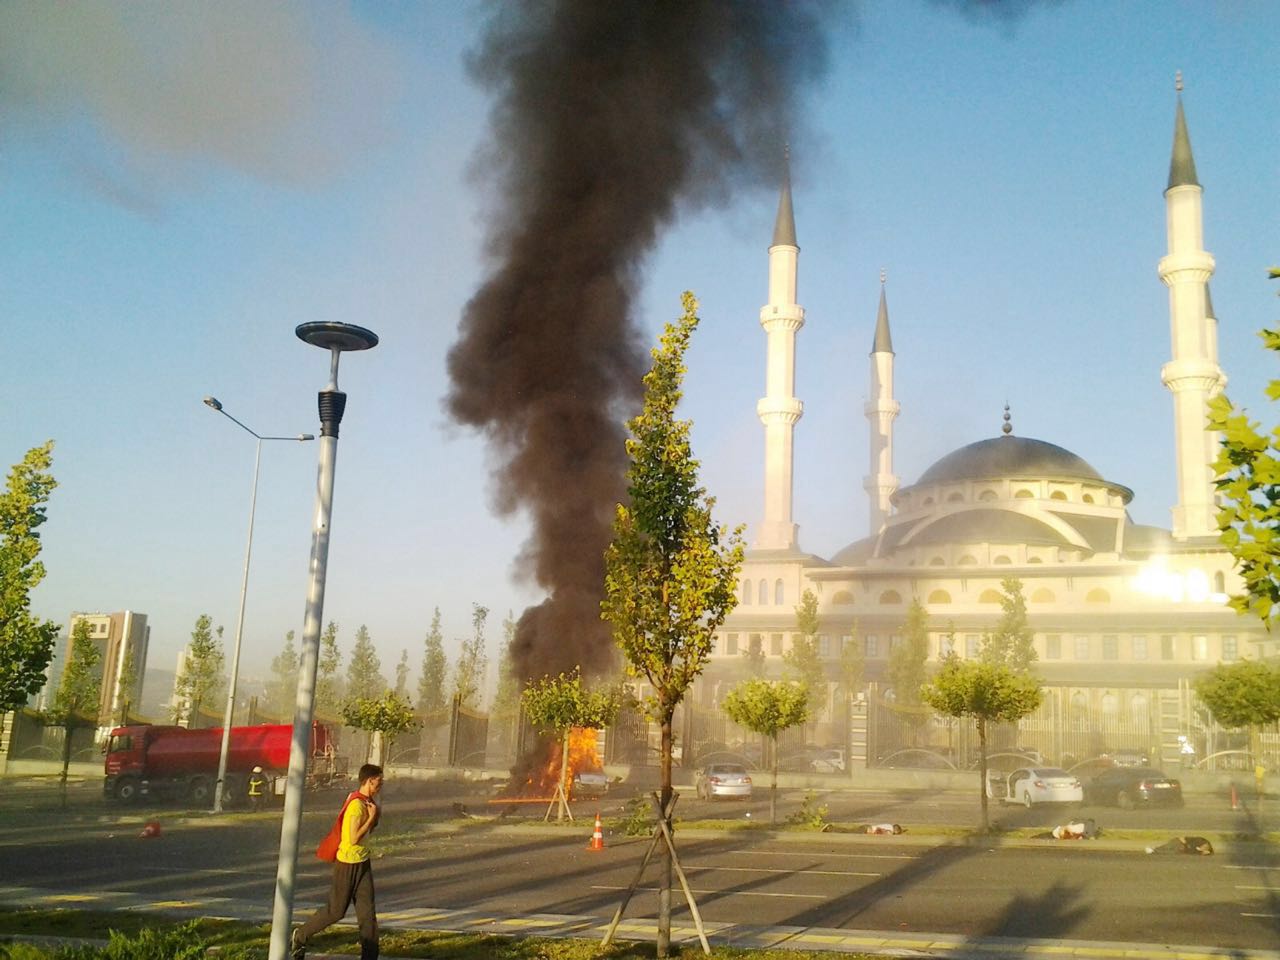 Bombs fell on one of the cars parked in front of Millet Mosque and the bombs killed five civilians.